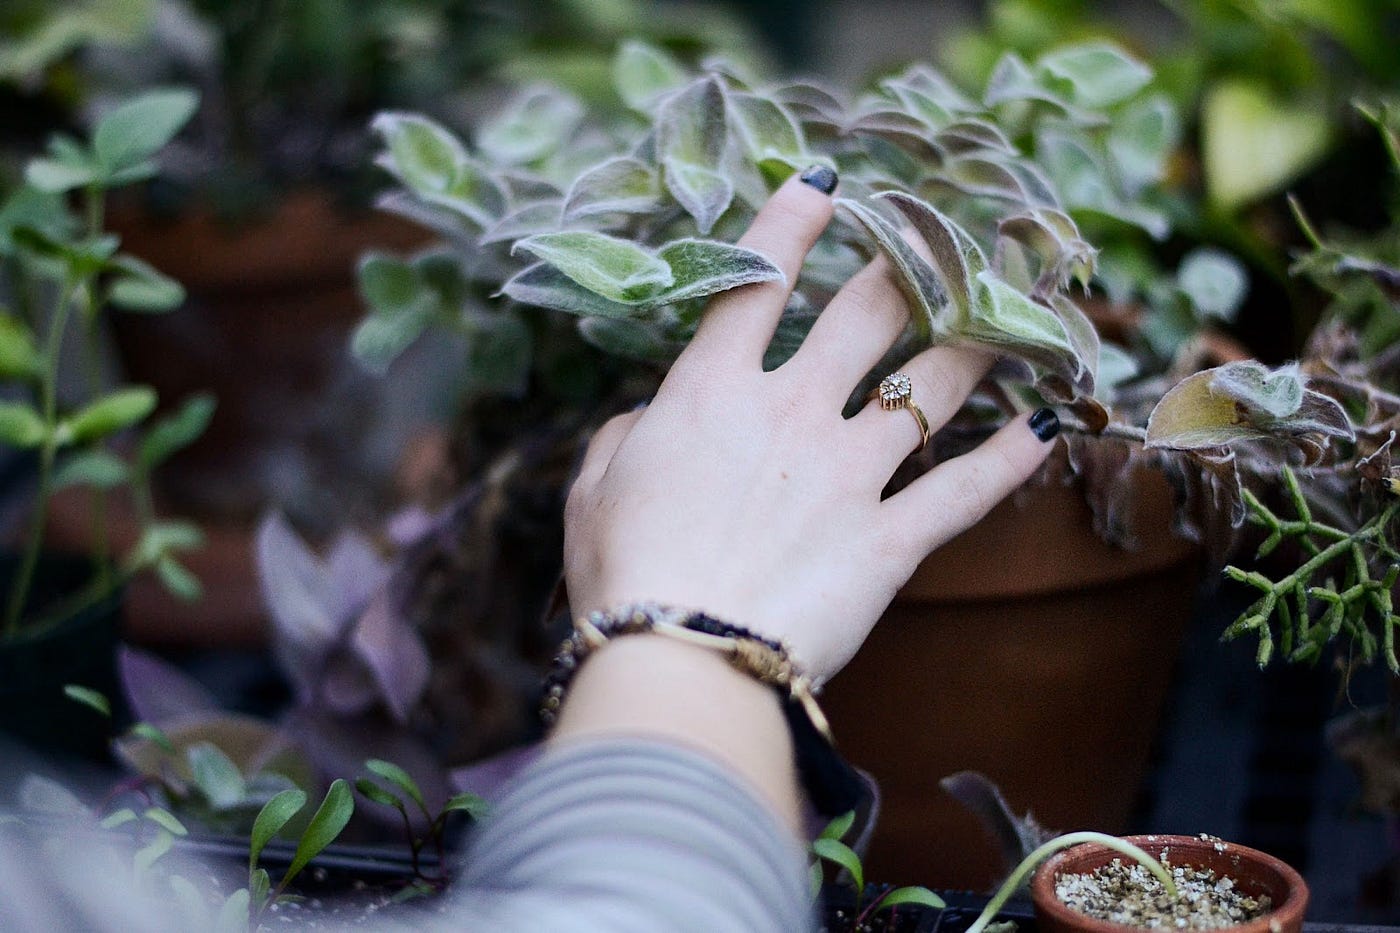 10 Types of Ivy Every Plant Lover Should Know